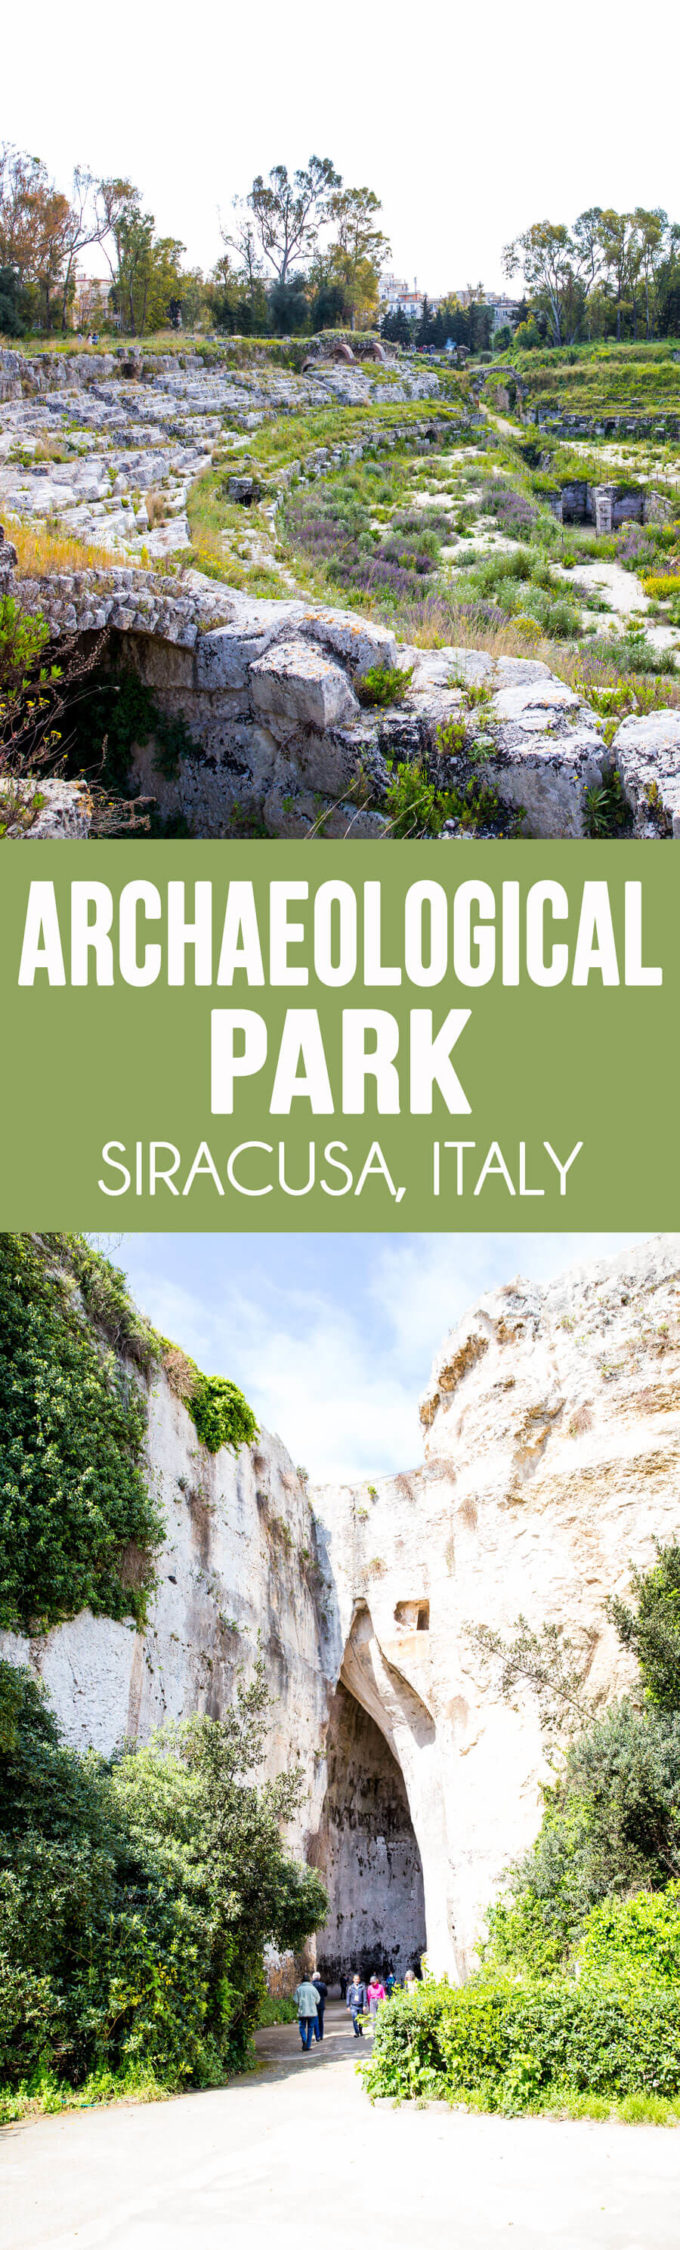 Archaeological park in Siracusa Italy, greek and roman amphitheaters